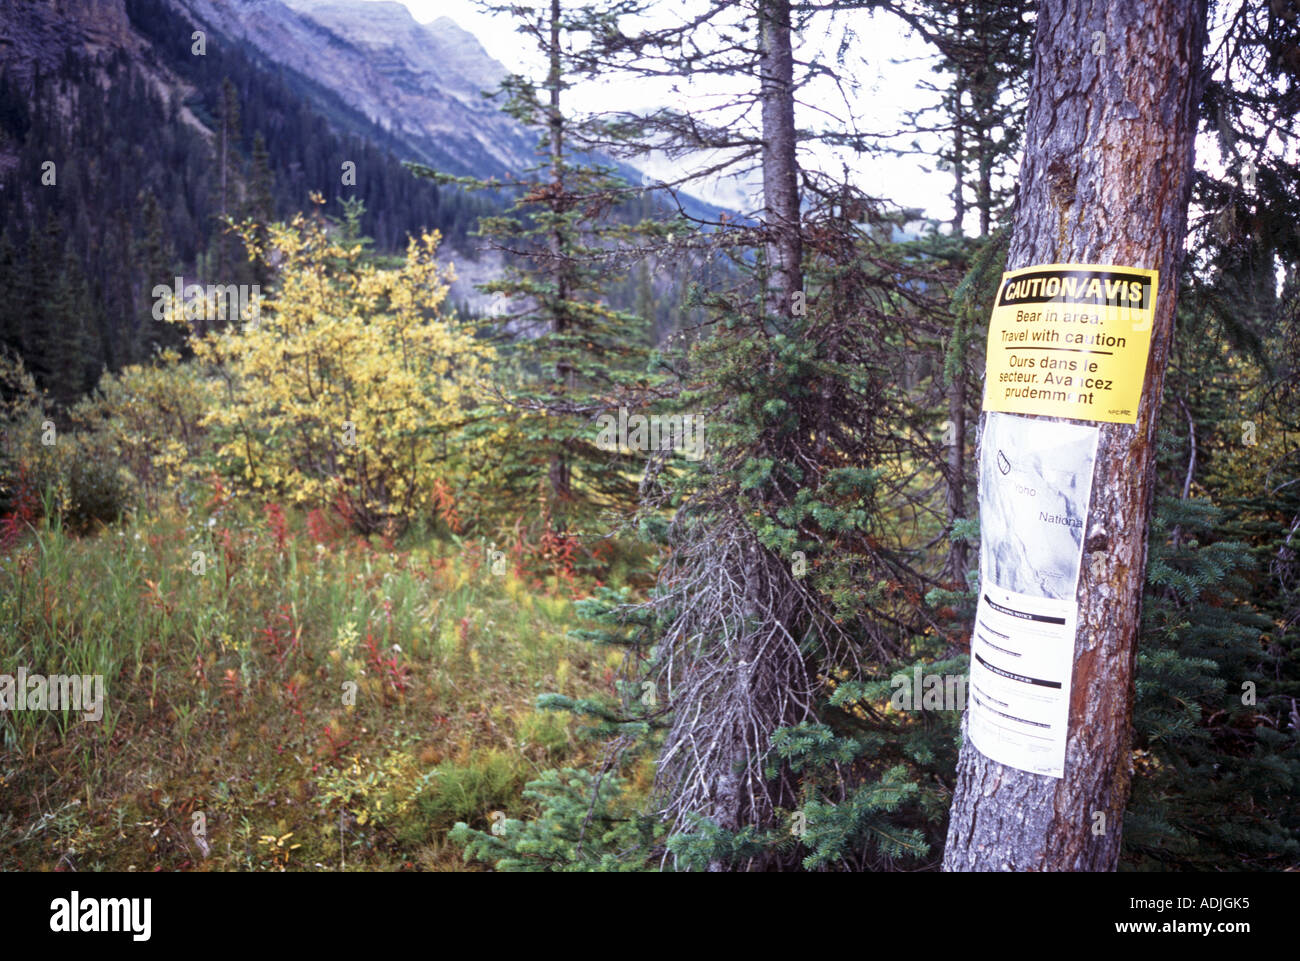 Grizzly Bear danger sign on tree aiding conservation management Yoho National Park British Columbia Canada Stock Photo